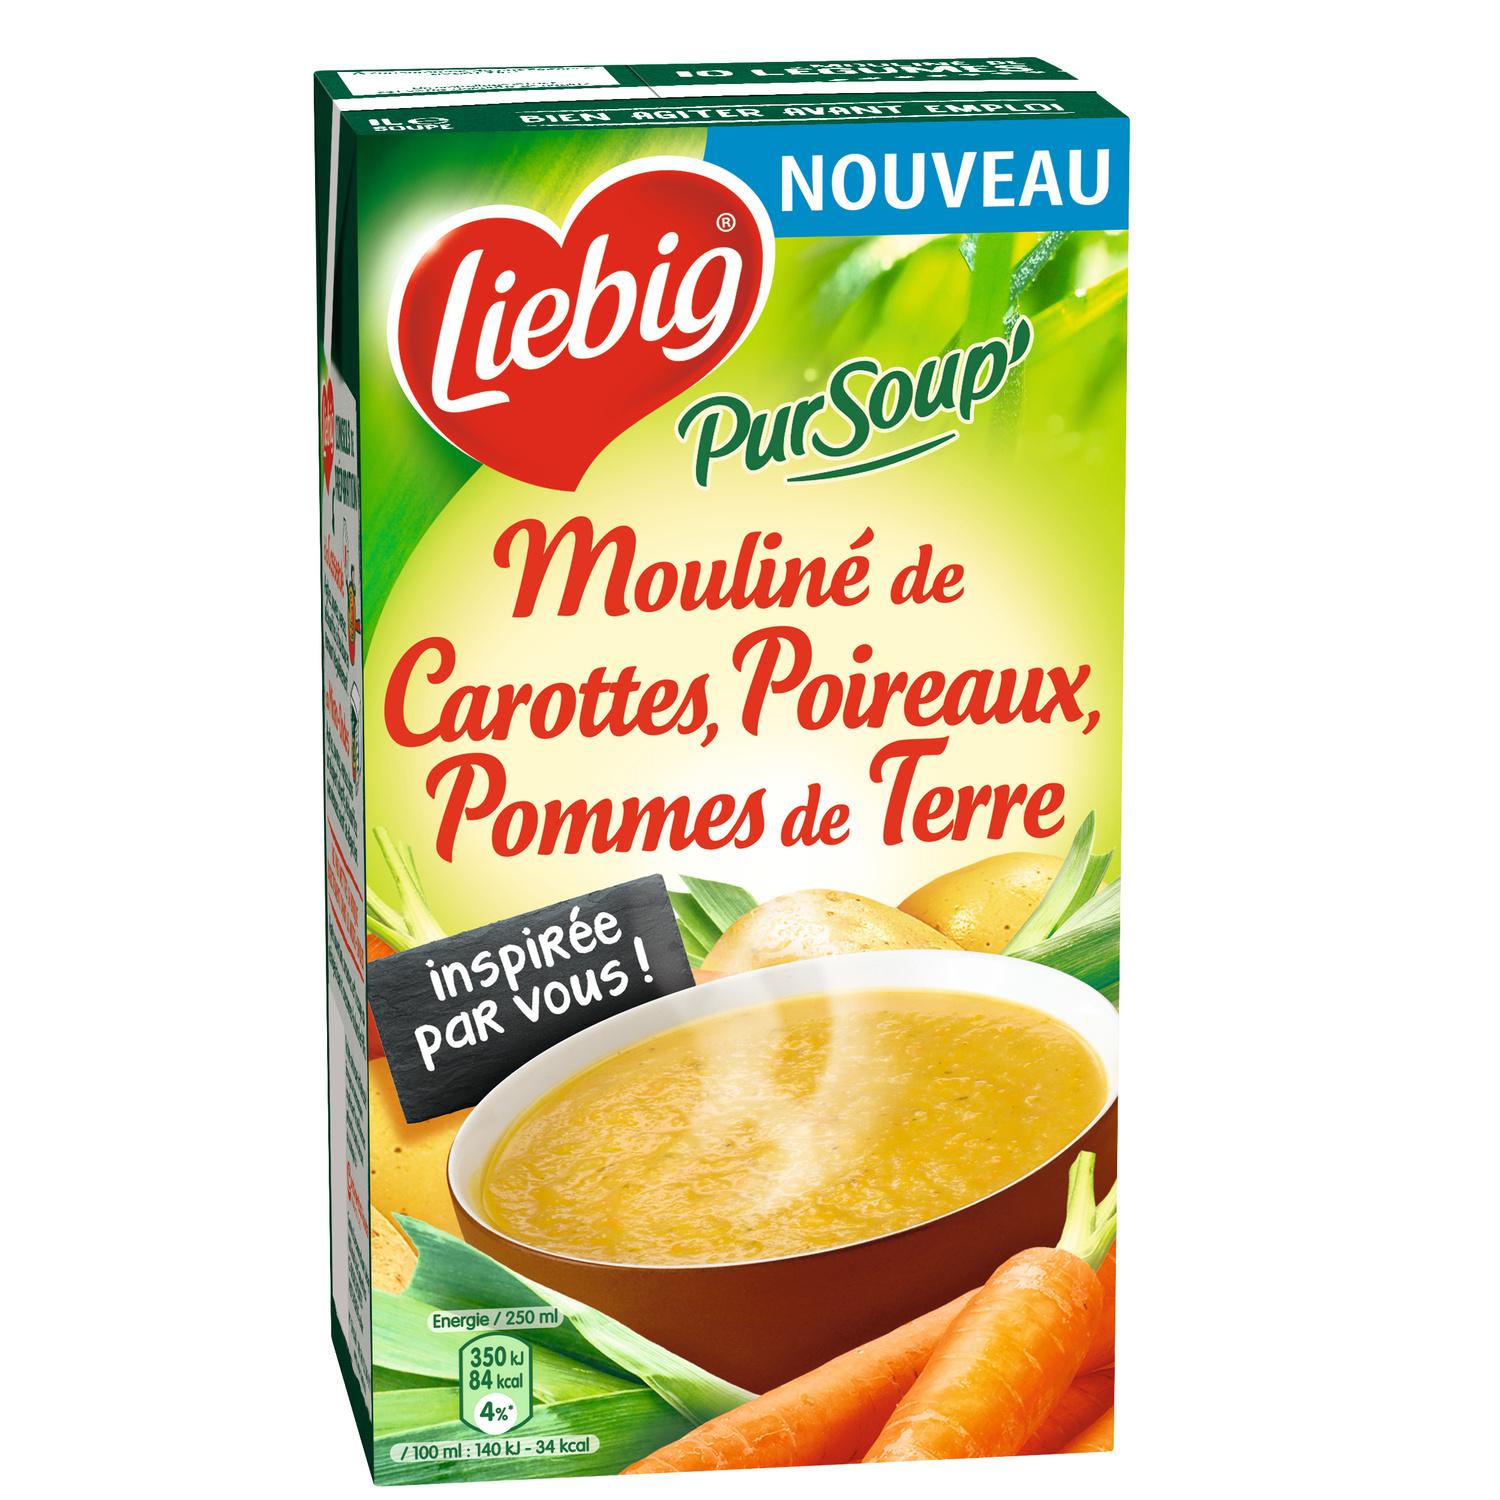 https://my-french-grocery.com/wp-content/uploads/2018/06/MOULINE.jpg